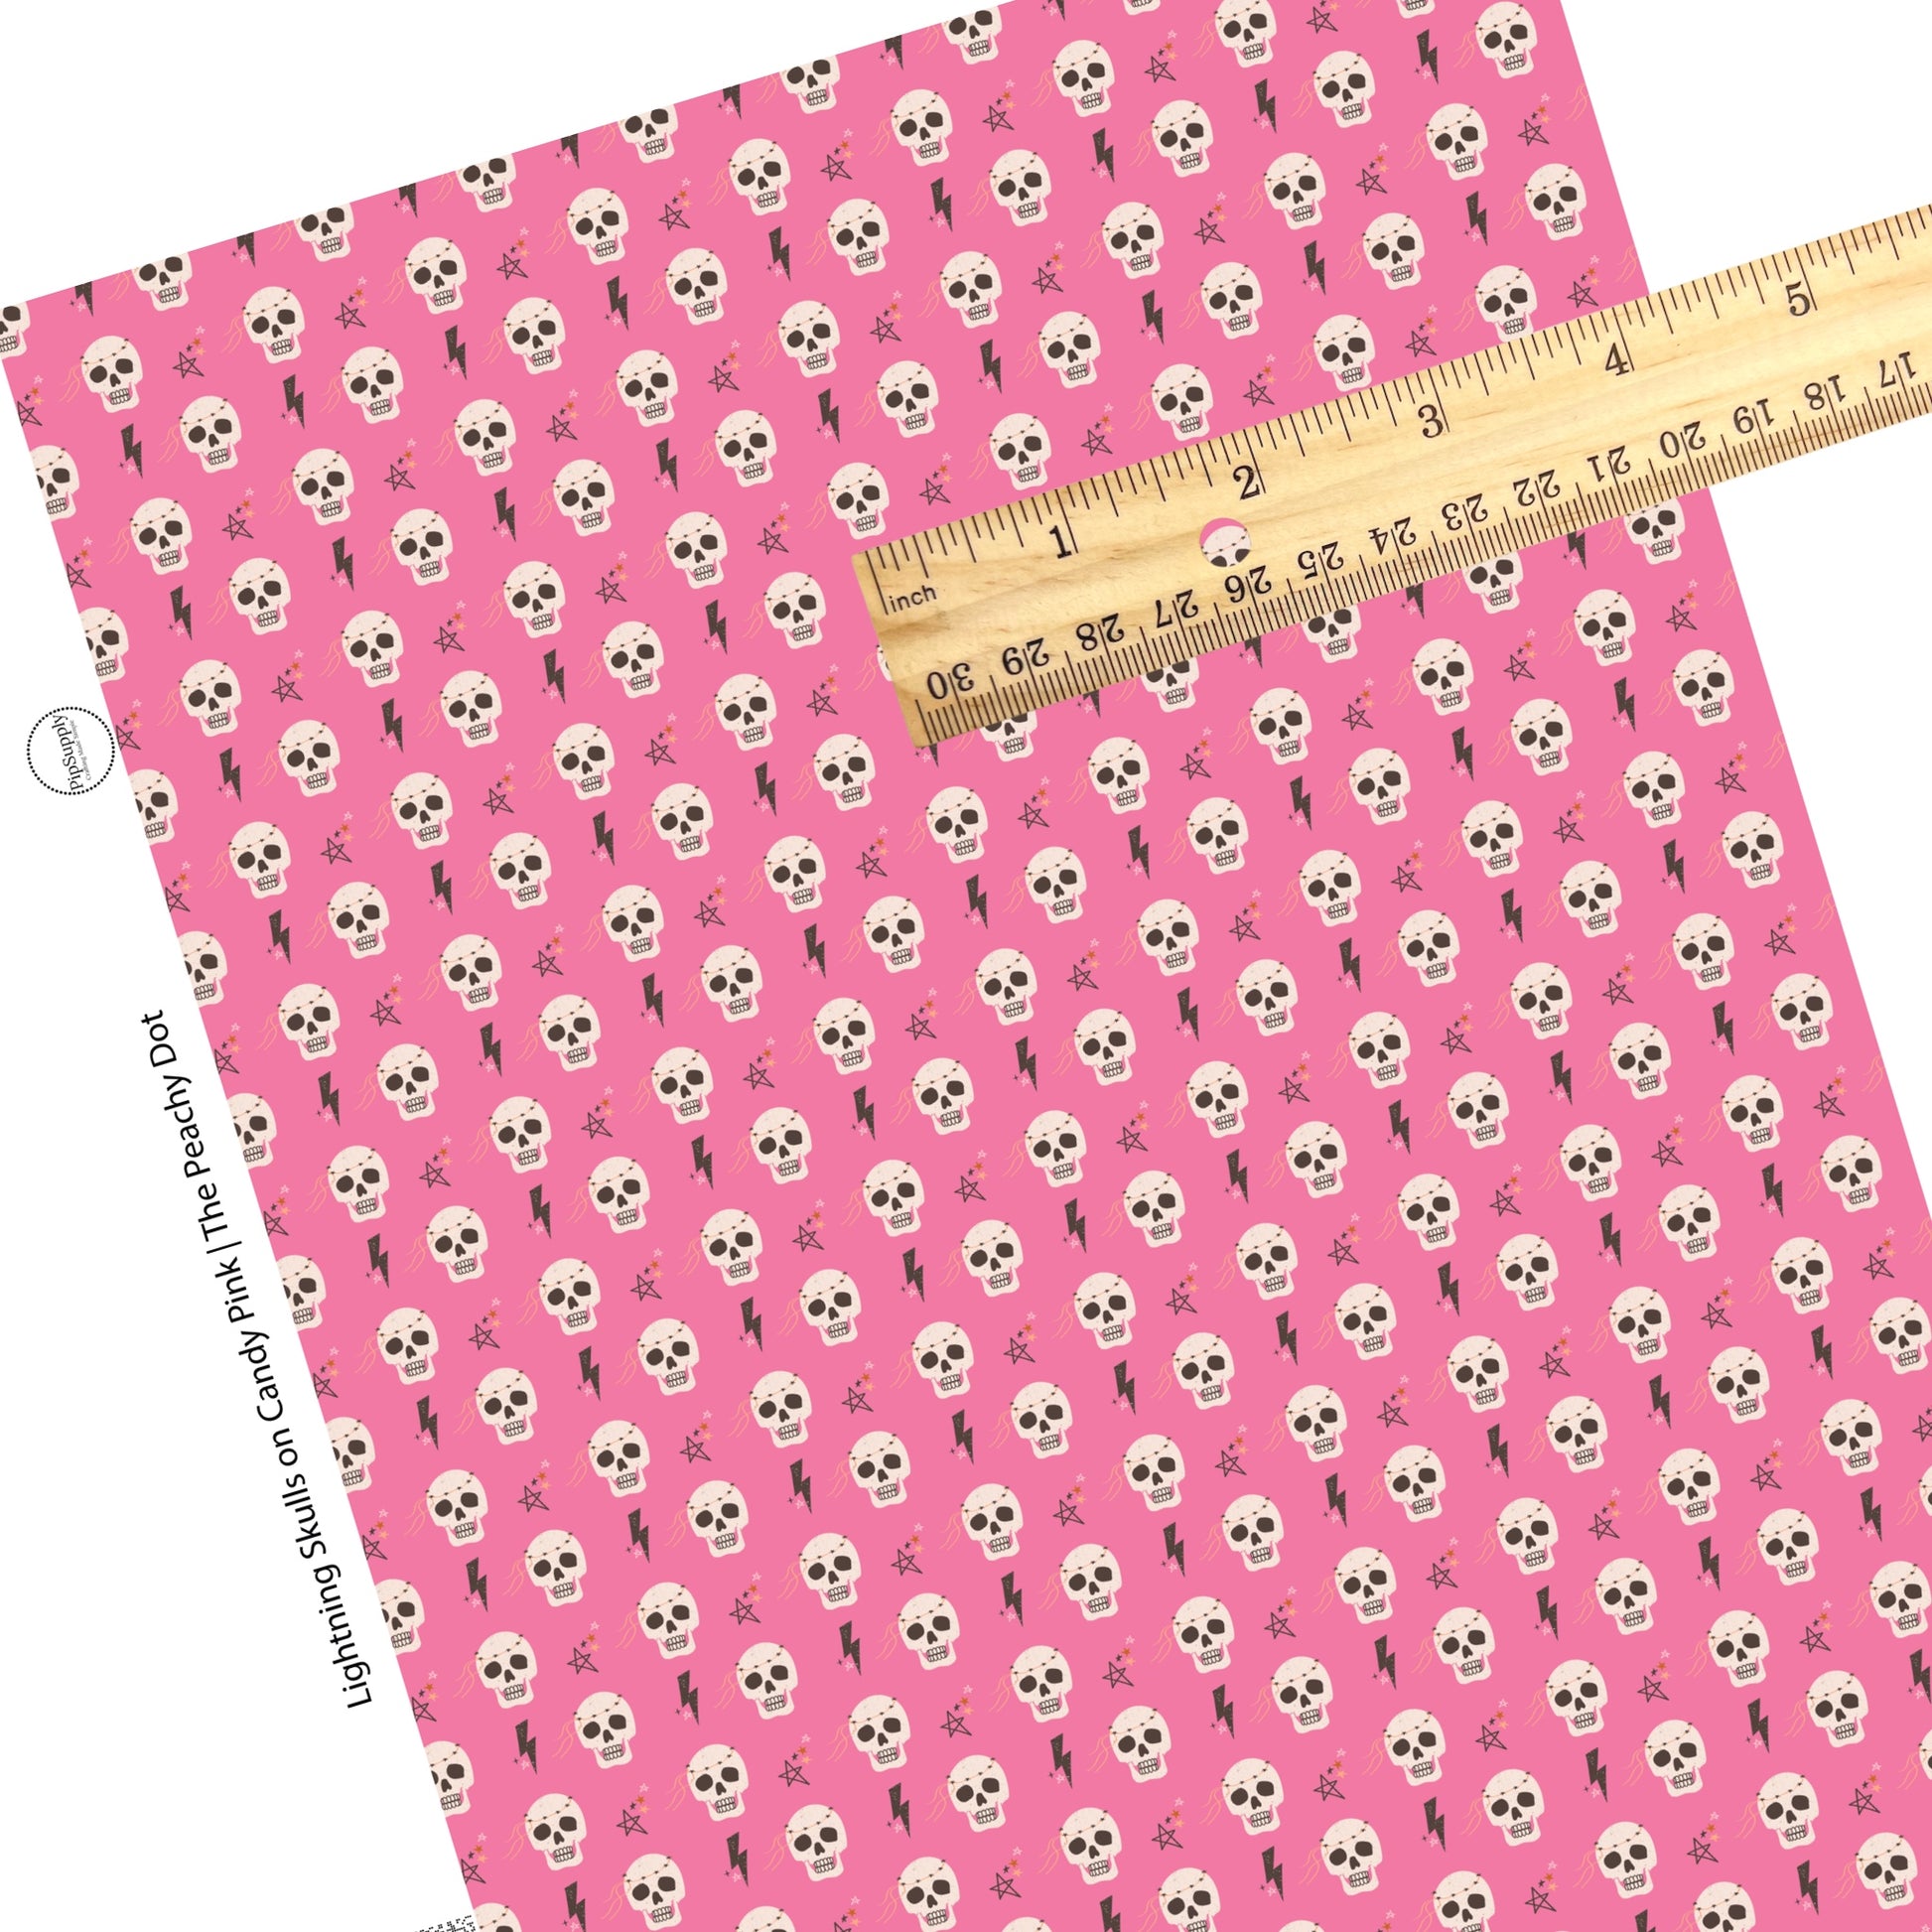 Skeletons with lightning bolts and stars on pink faux leather sheets